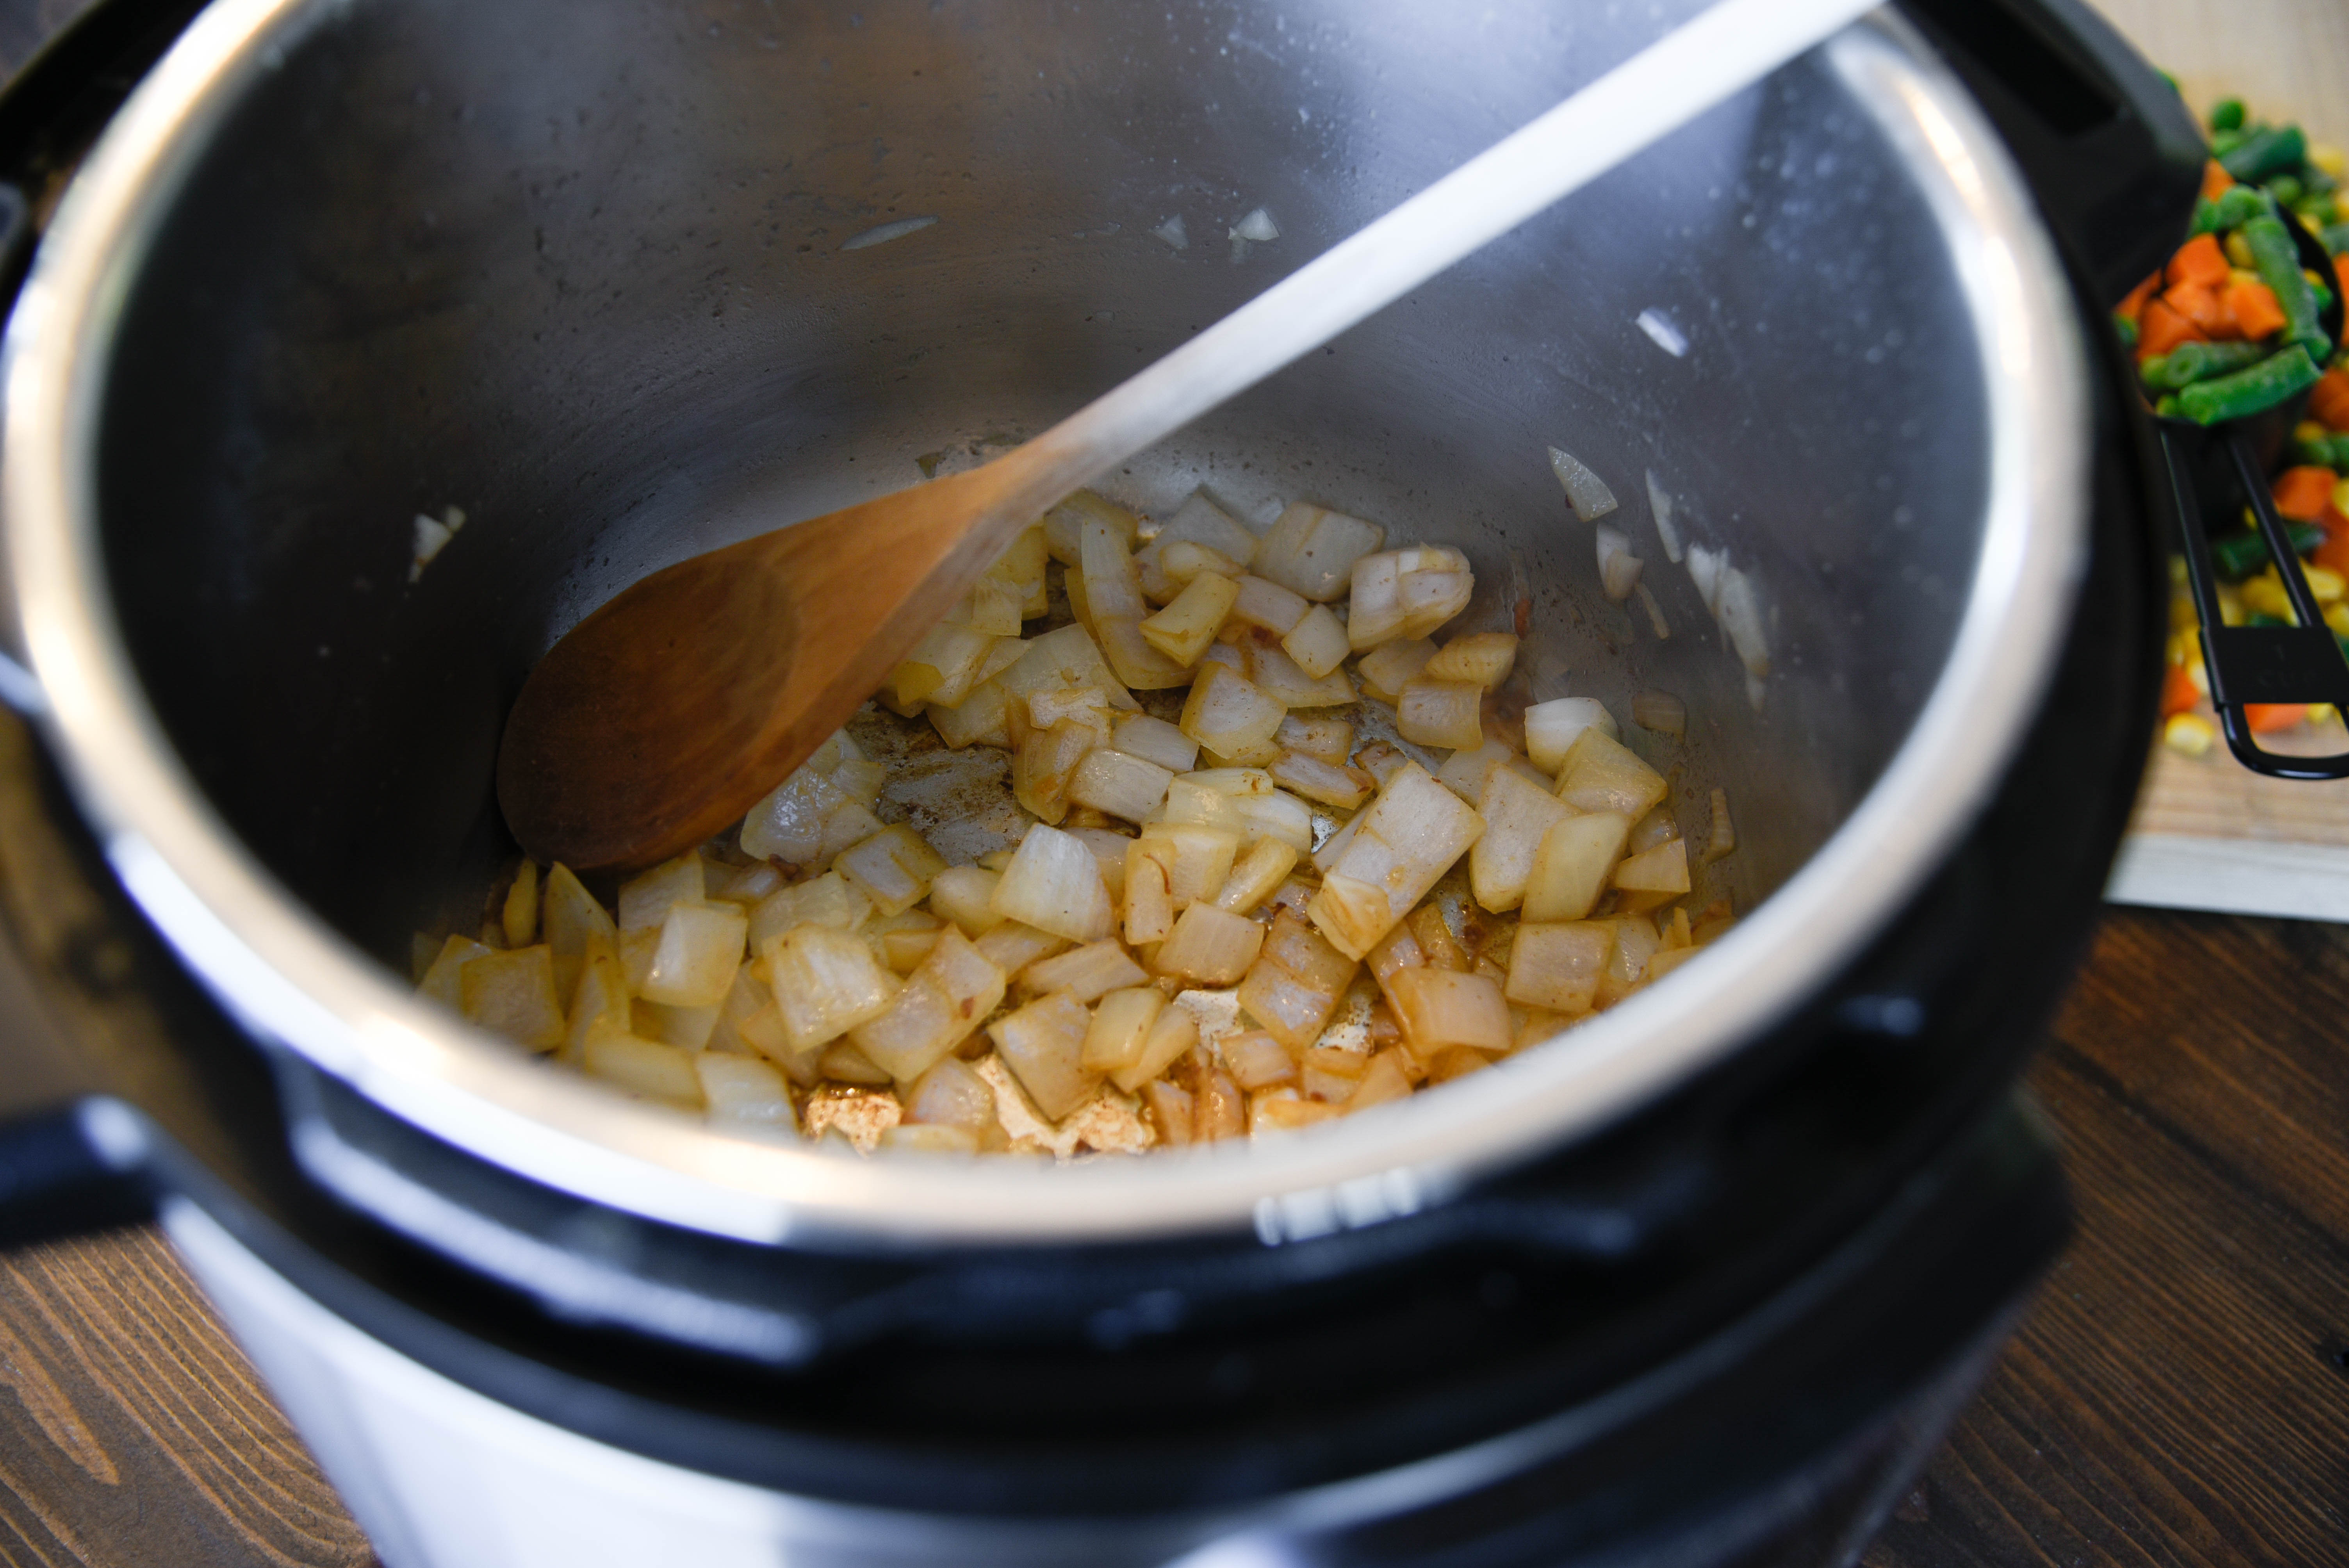 Onions carmelizing at the bottom of a pressure cooker.